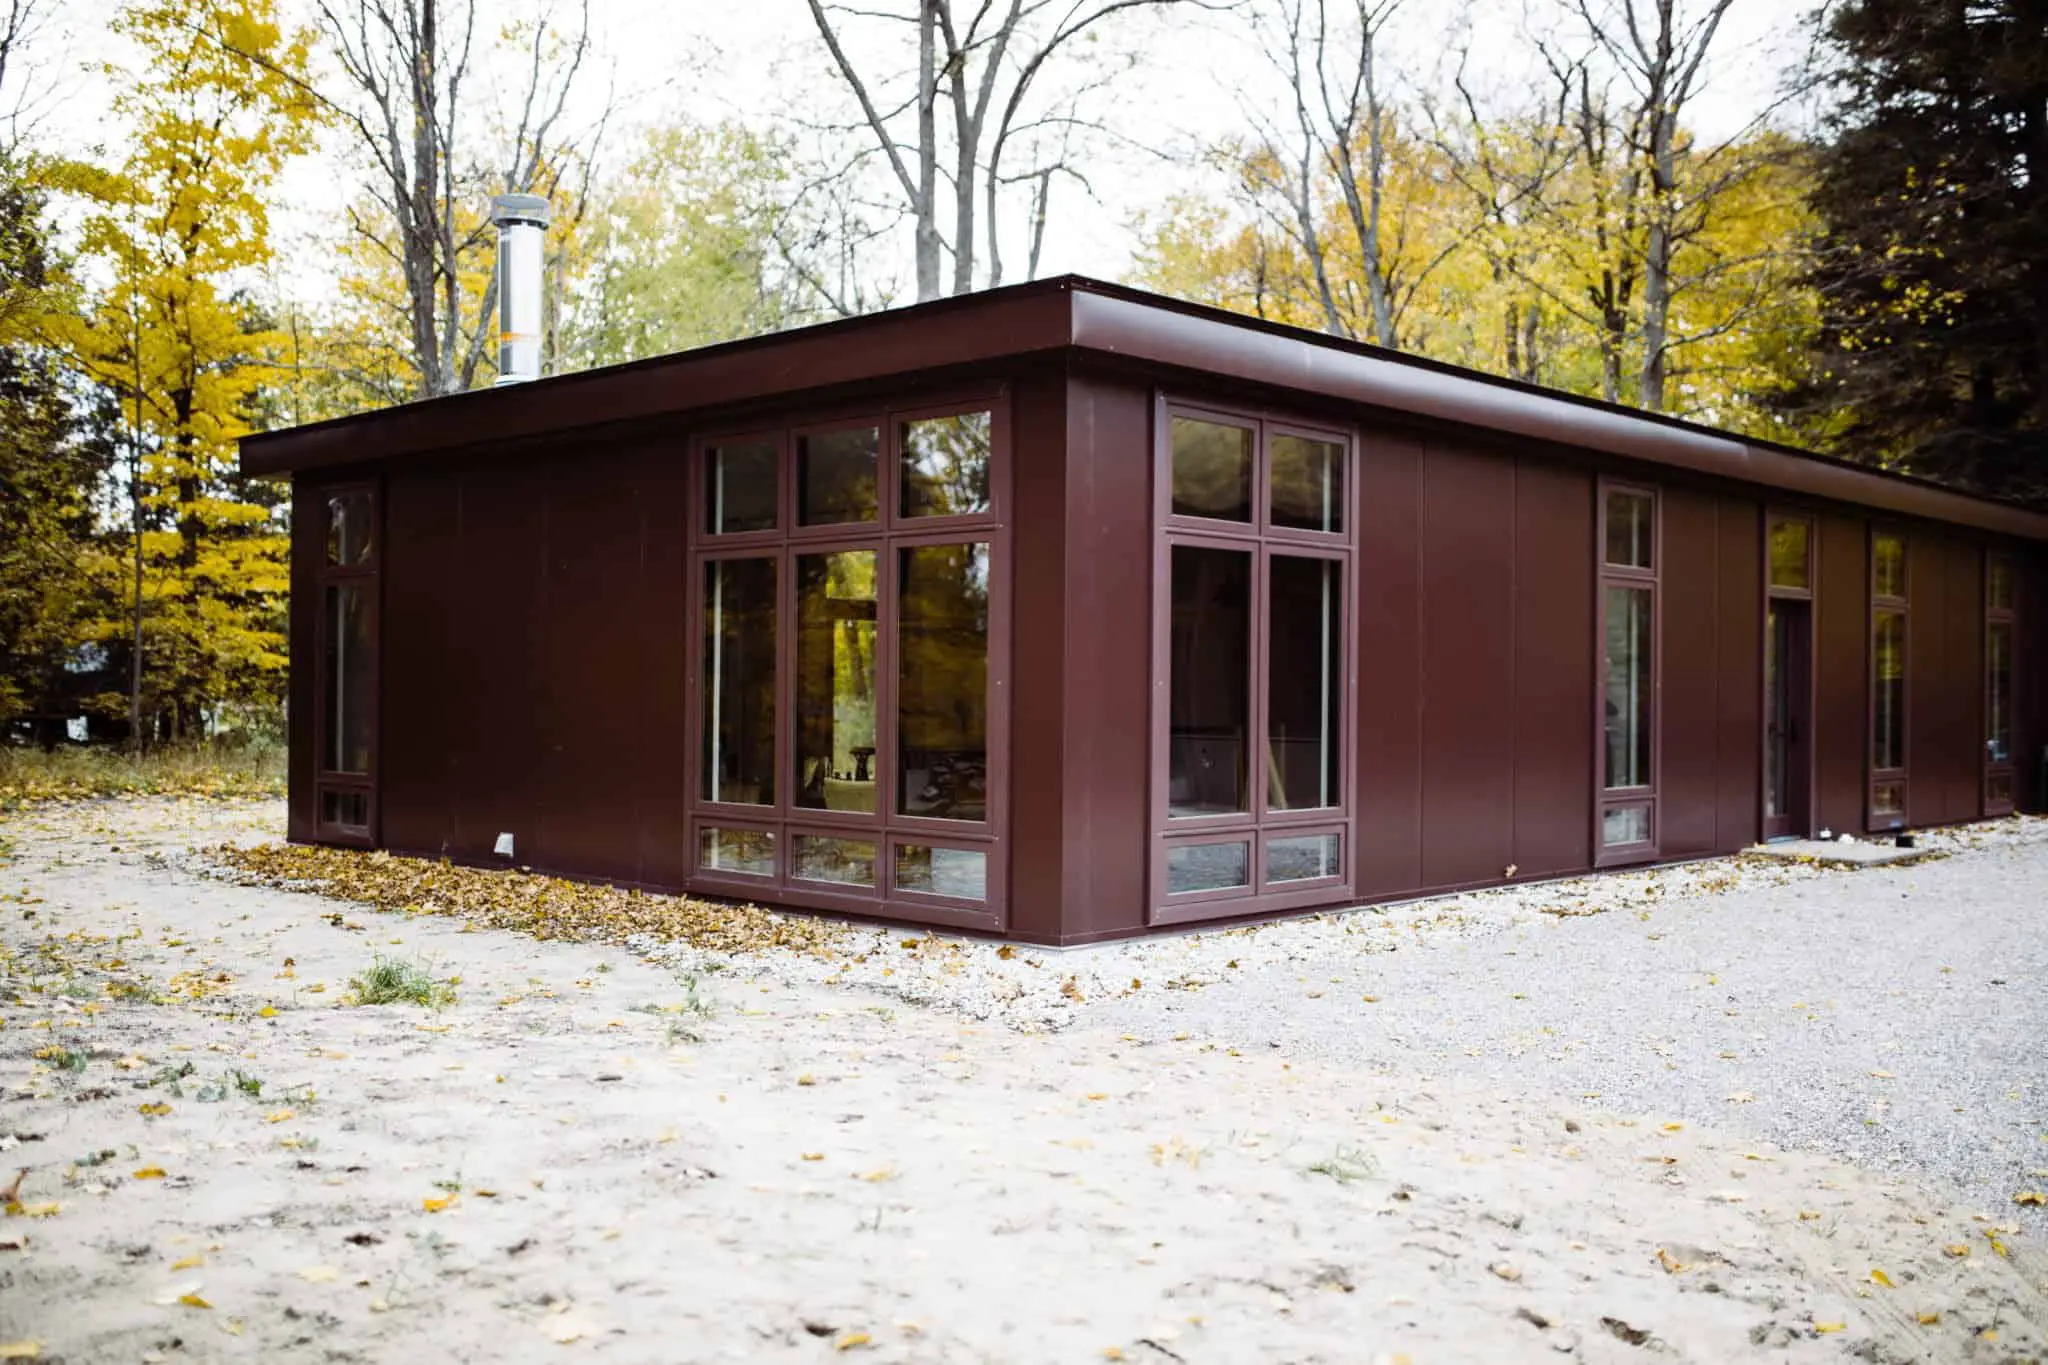 Hygge Supply modular kit home - view of exterior.